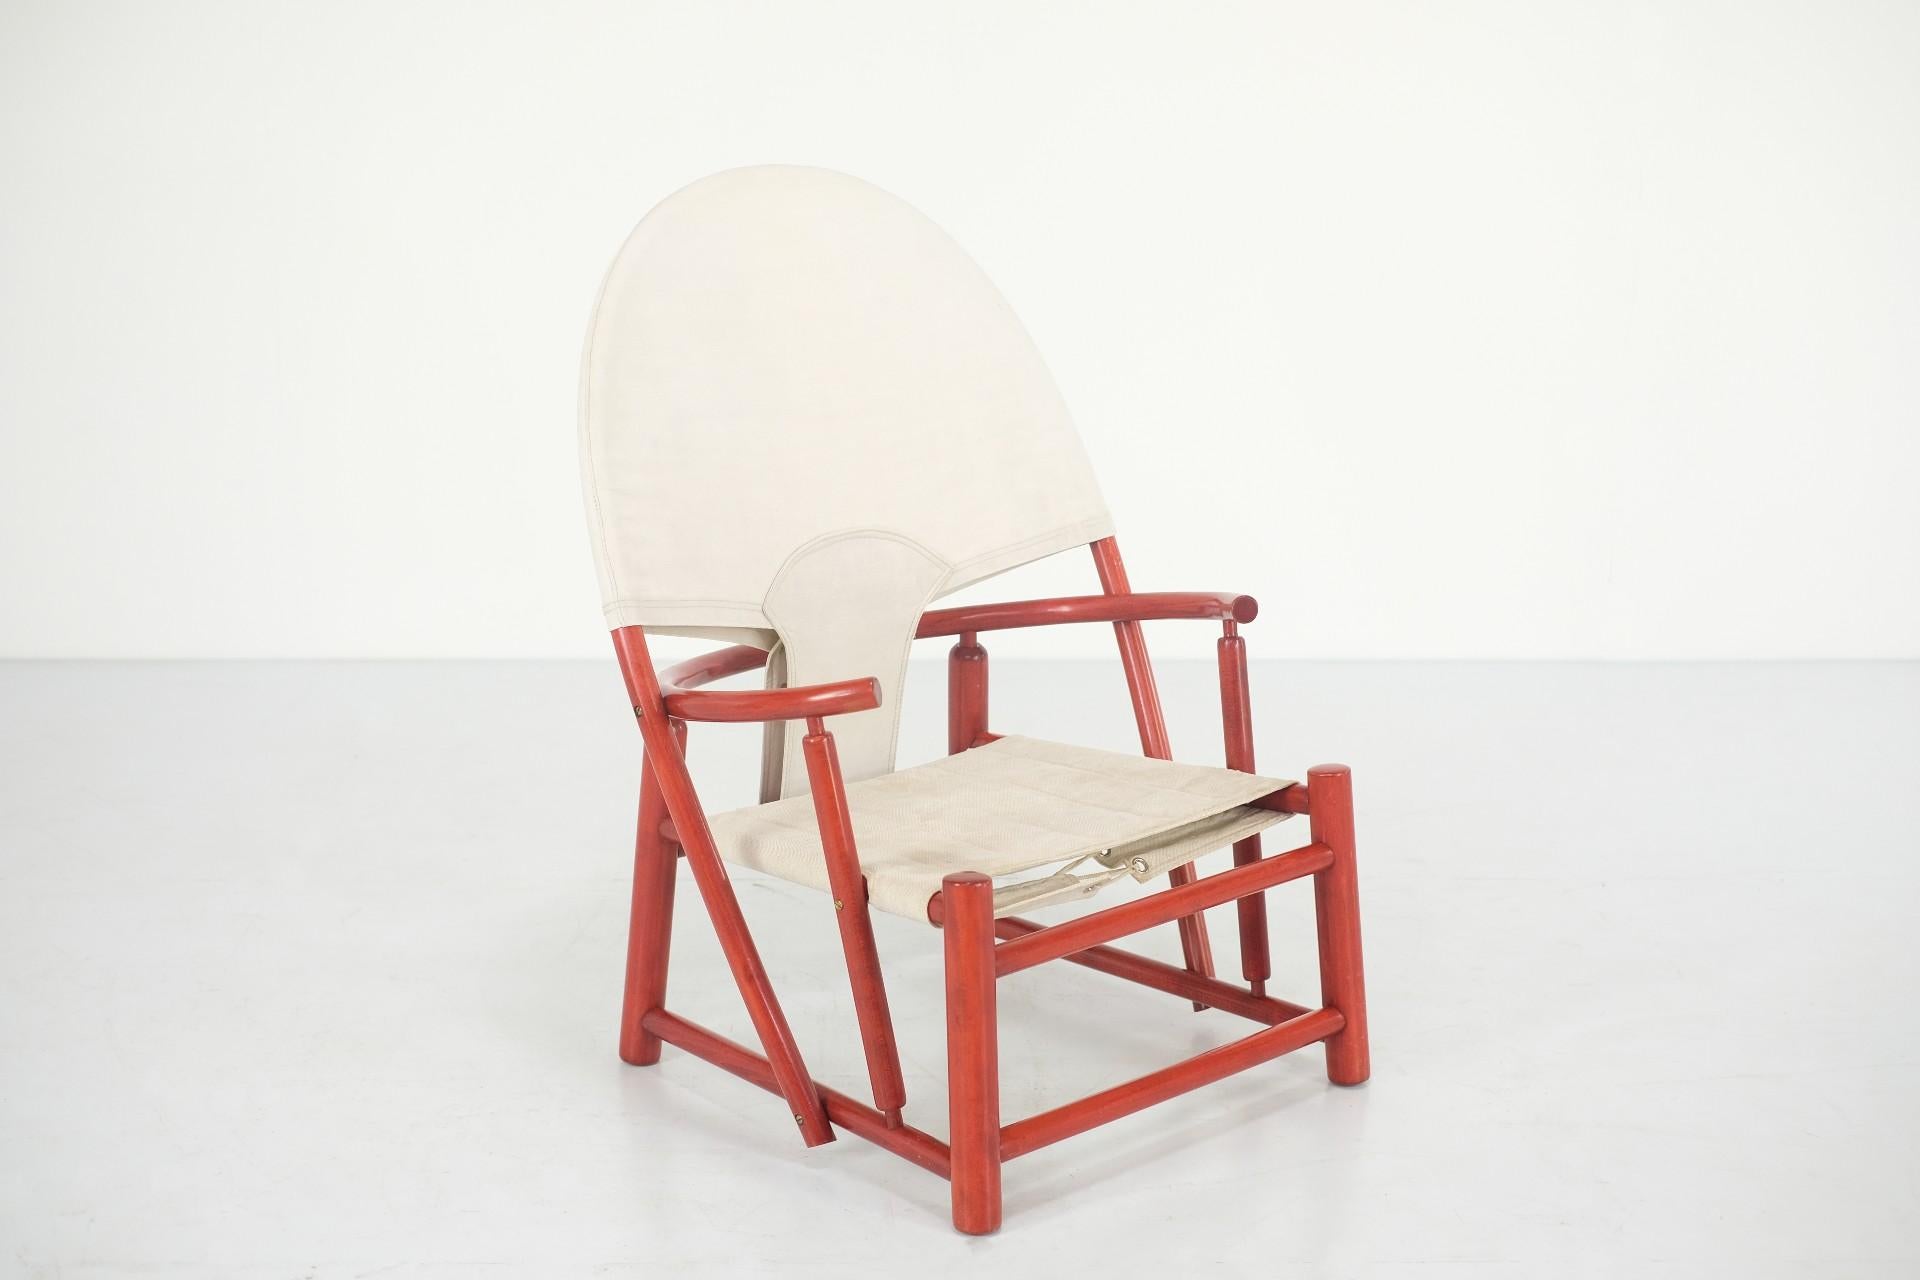 Hoop Chair by Piero Palange & Werther Toffoloni for Germa - 1970s In Good Condition For Sale In Uccle, BE